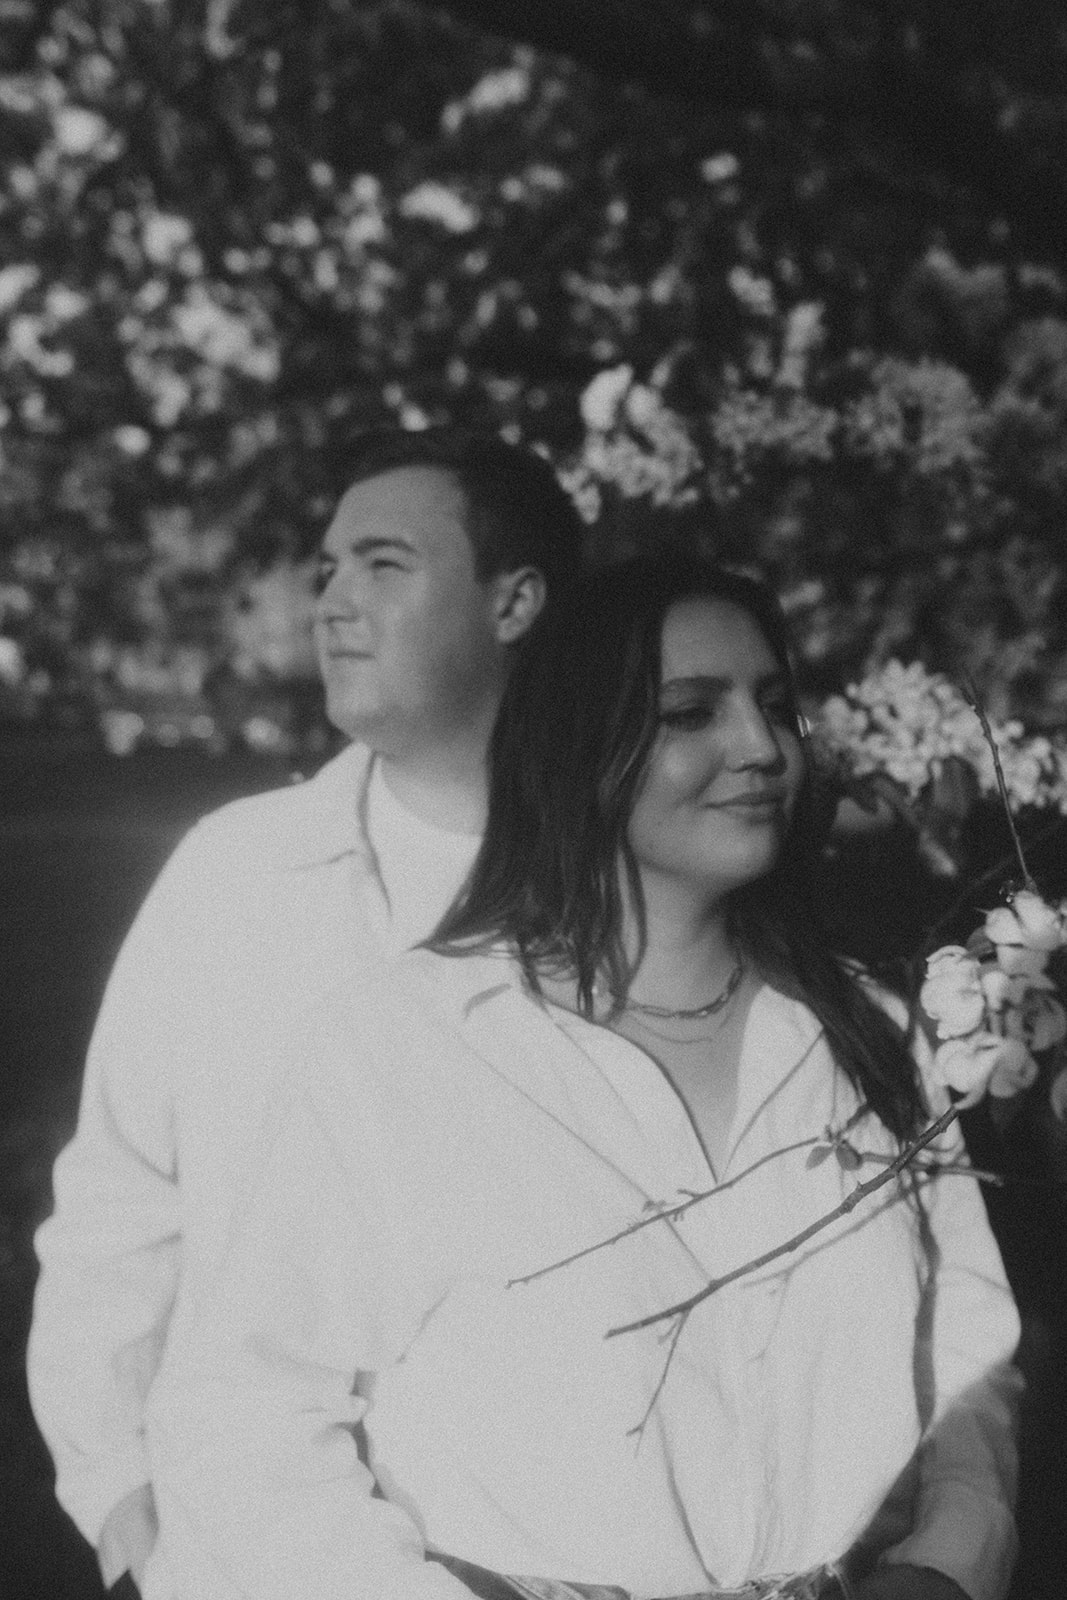 couple standing together under flowering trees in the sunlight during sunrise